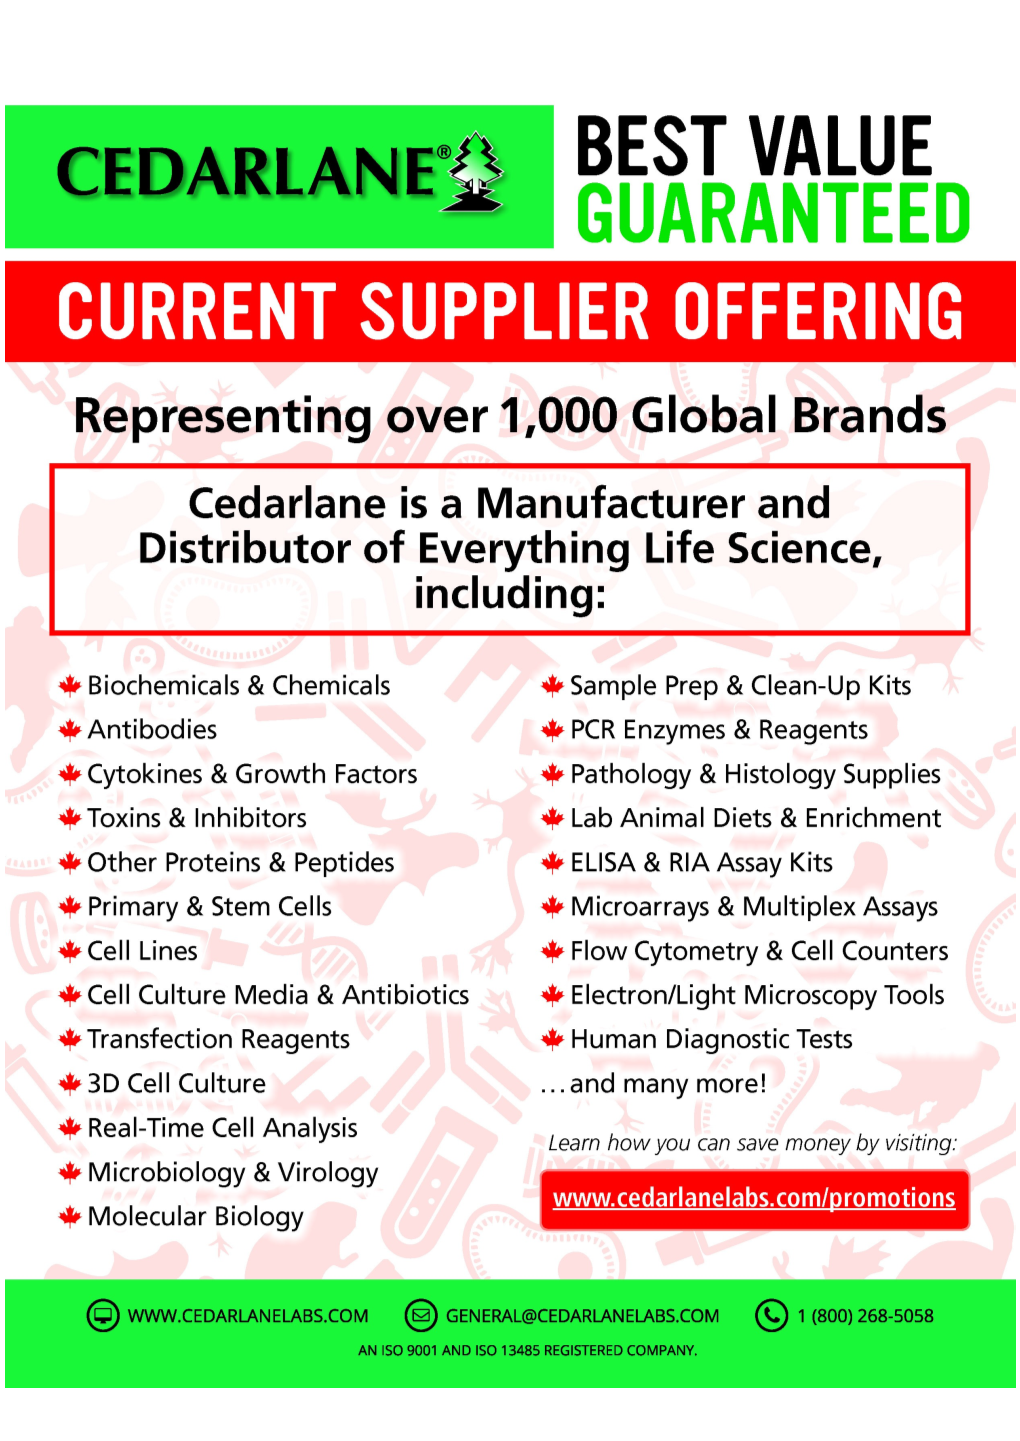 Consolidate Suppliers & Save Listing